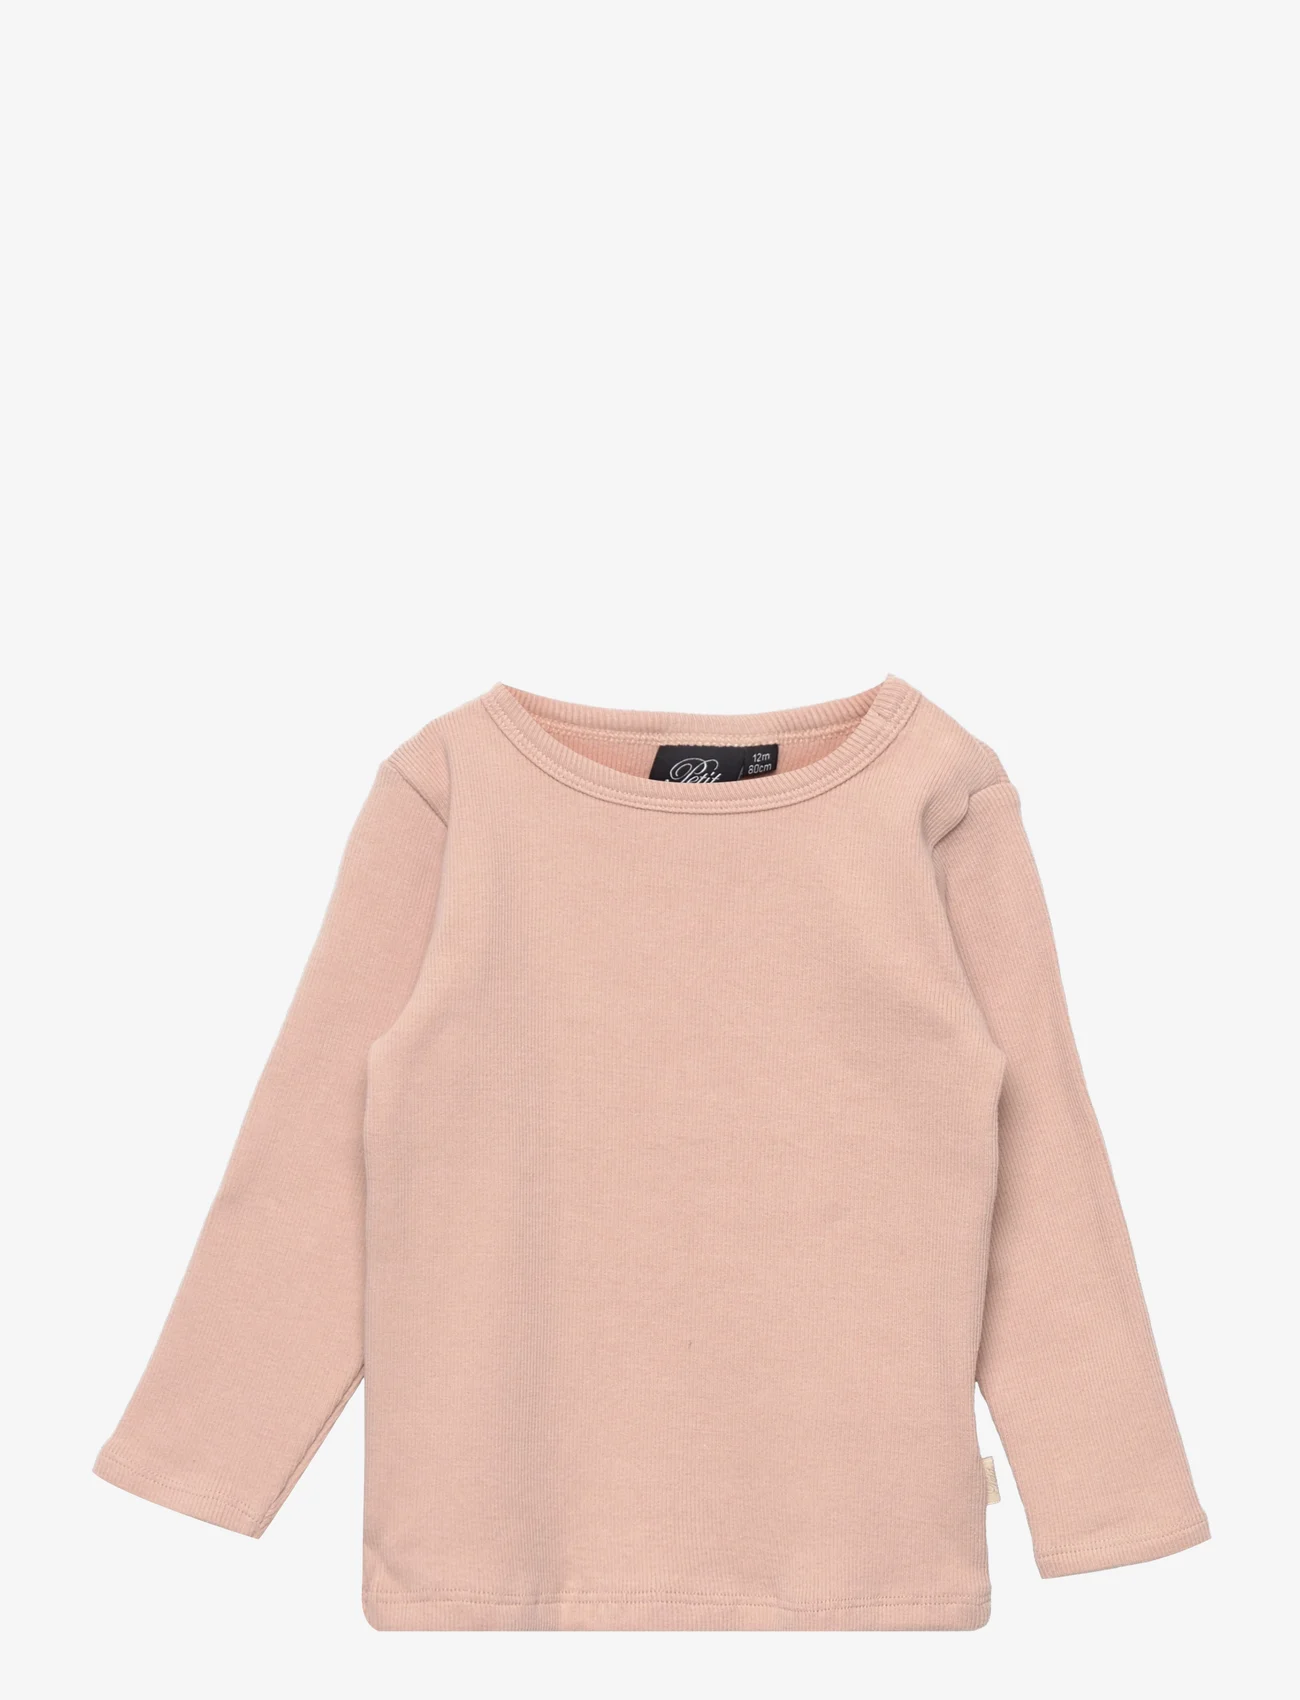 Sofie Schnoor Baby and Kids - T-shirt long-sleeve - long-sleeved t-shirts - light rose - 0